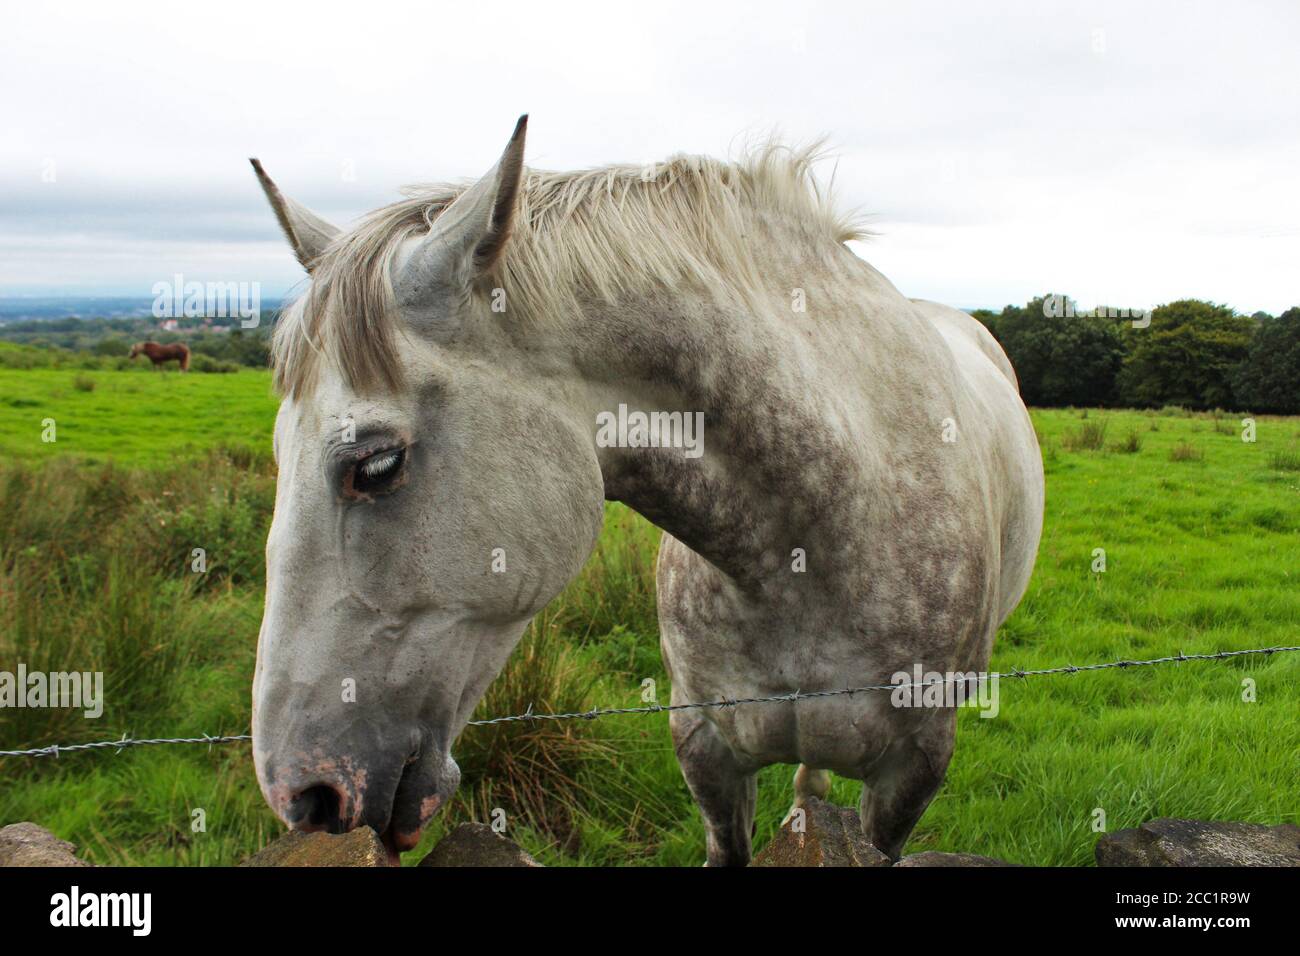 Dapple Gray horse face and neck, with pink skin around mouth and eyes, sniffing a rock on Winter Hill, England Stock Photo